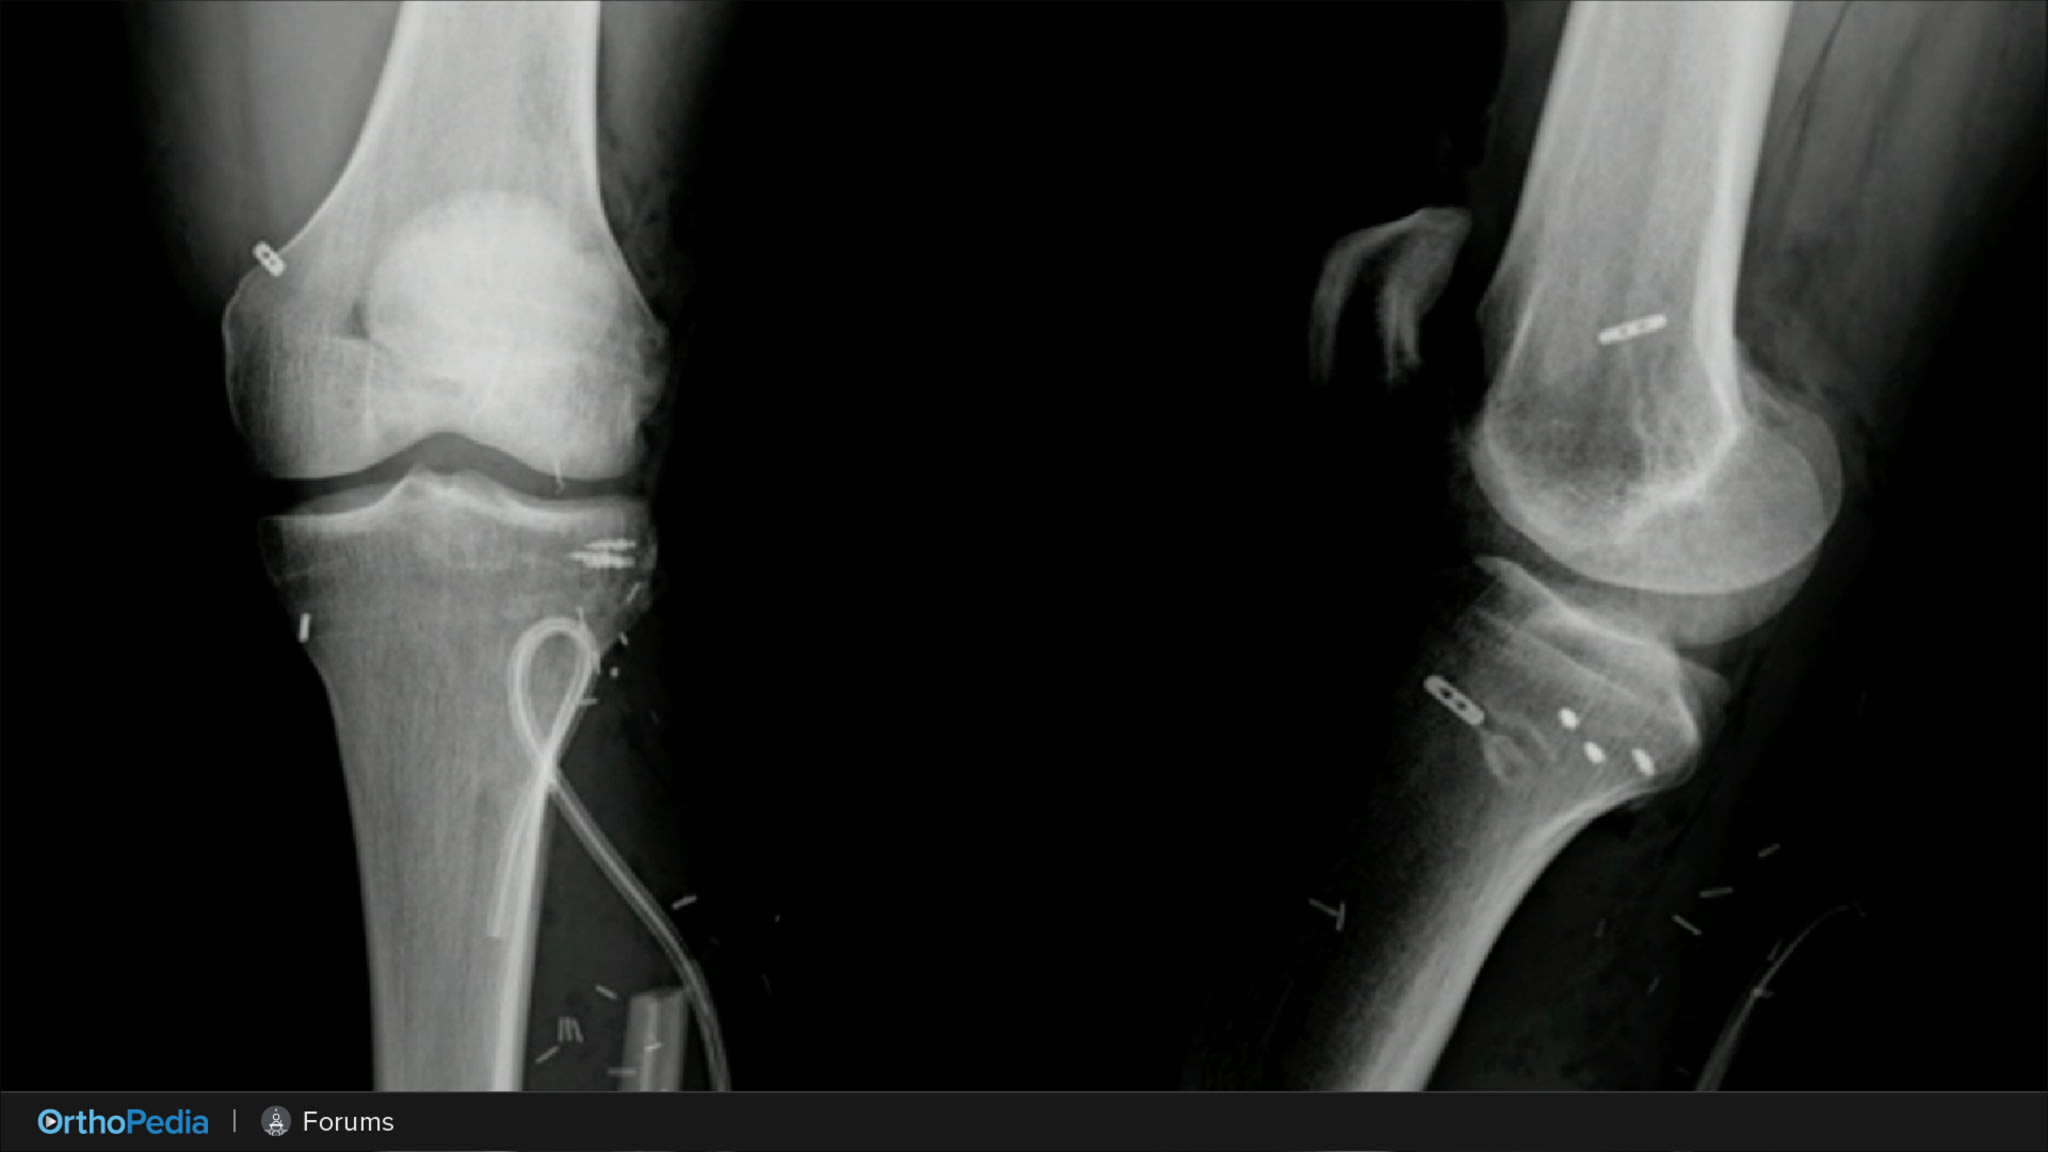 OTIF: Long-Term Outcomes and New Trends in High Tibial Osteotomy (HTO)